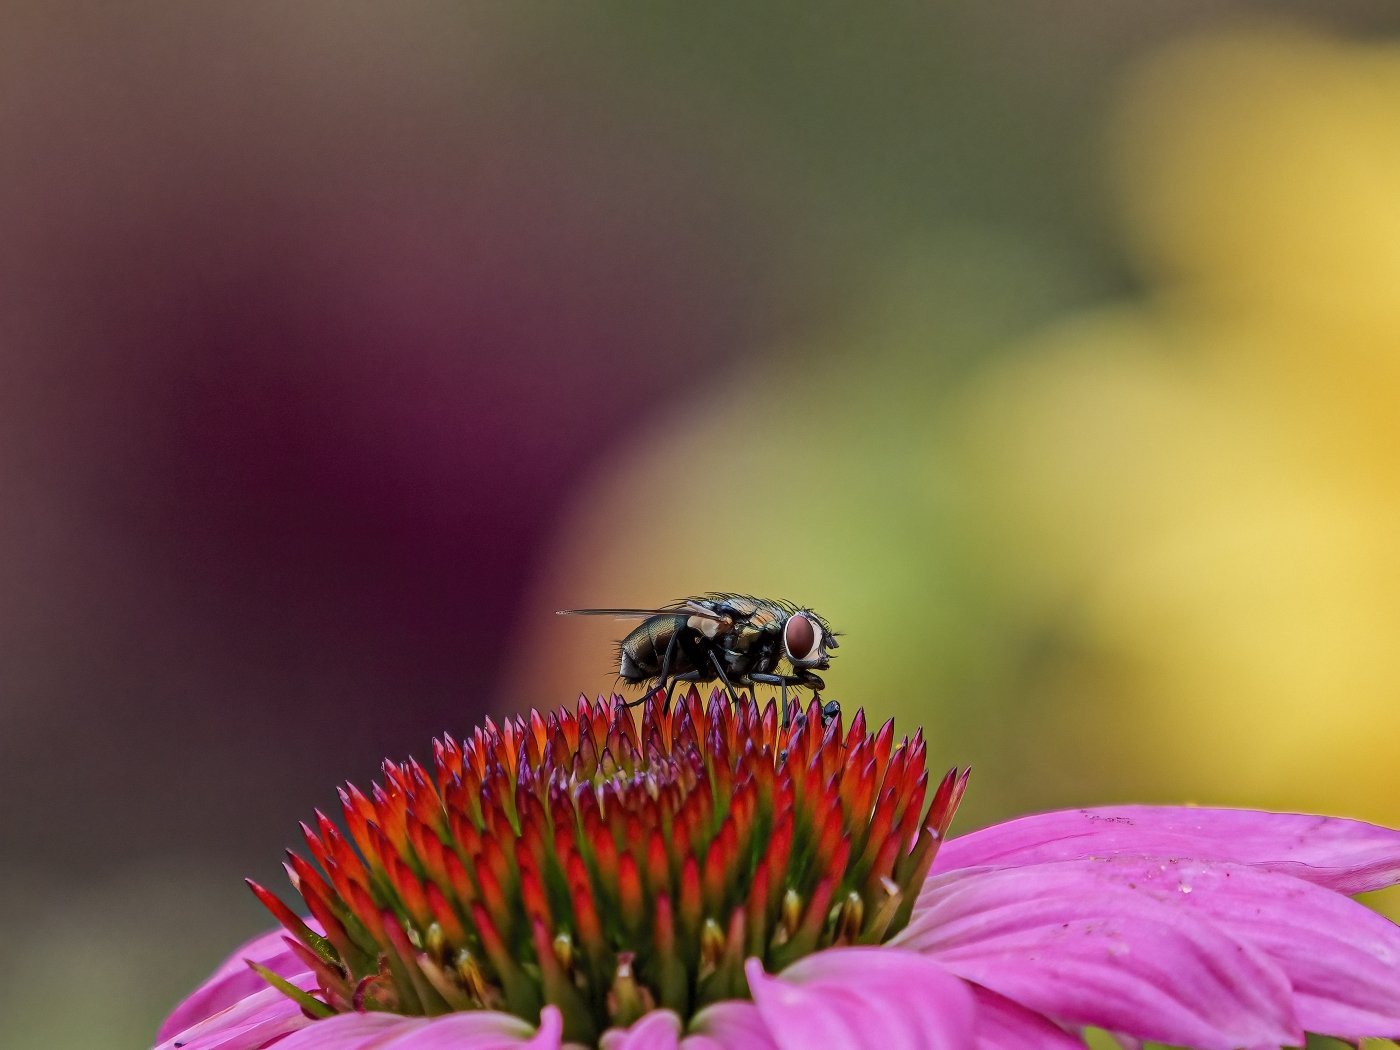 The Fly, Mary Binford, Heard Nature Photography Club, 3rd Place